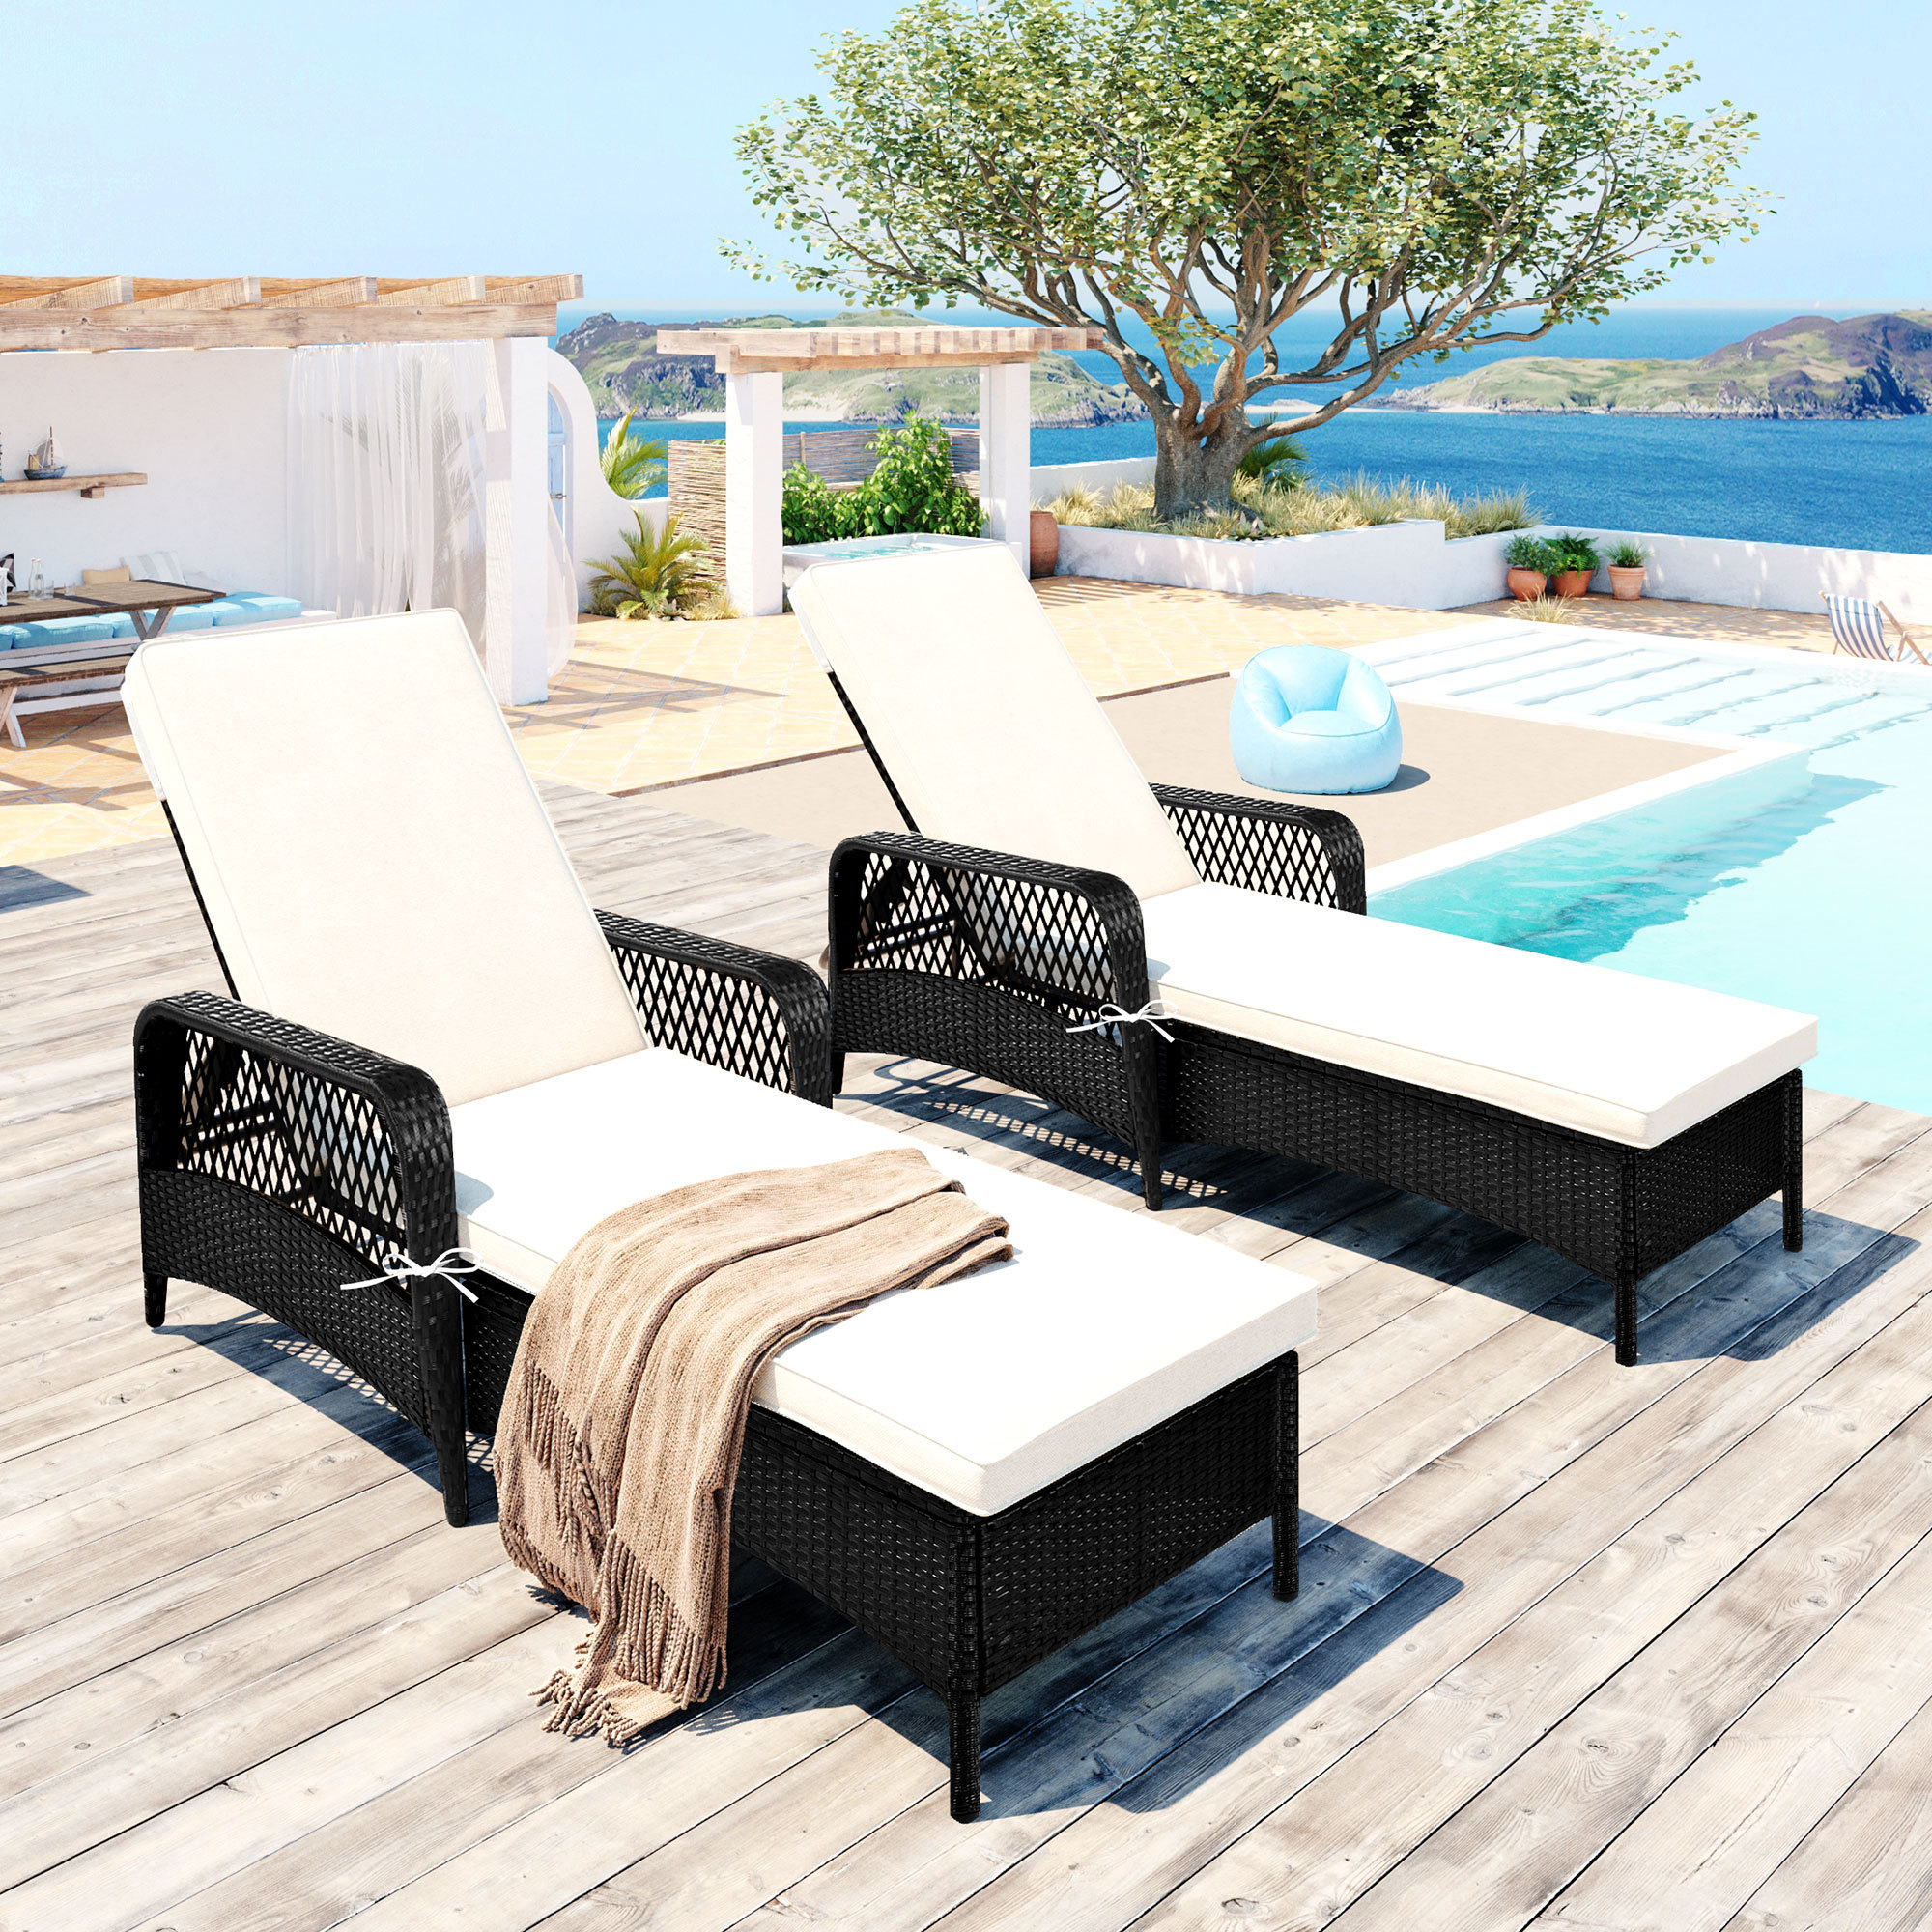 2PCS Chaise Lounges for Beach, Aukfa Adjustable Patio Chaise Lounge Chair, Outdoor Rattan Lounge Chair with Armrest and Cushion, Patio Furniture Recliner for Deck, Poolside, Backyard - image 1 of 11